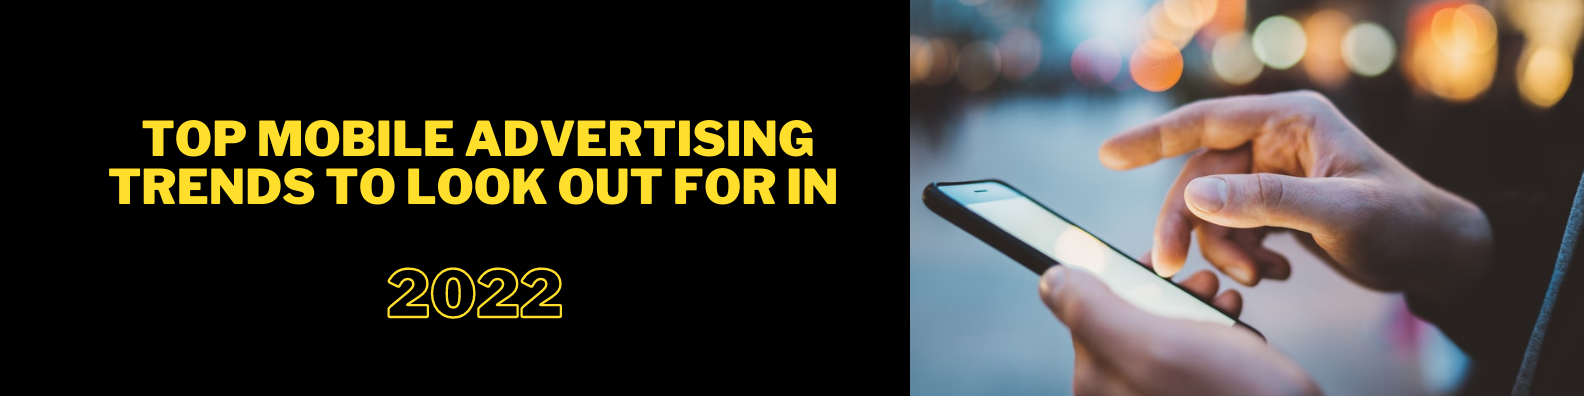 Top Mobile Advertising Trends to Look Out For In 2022